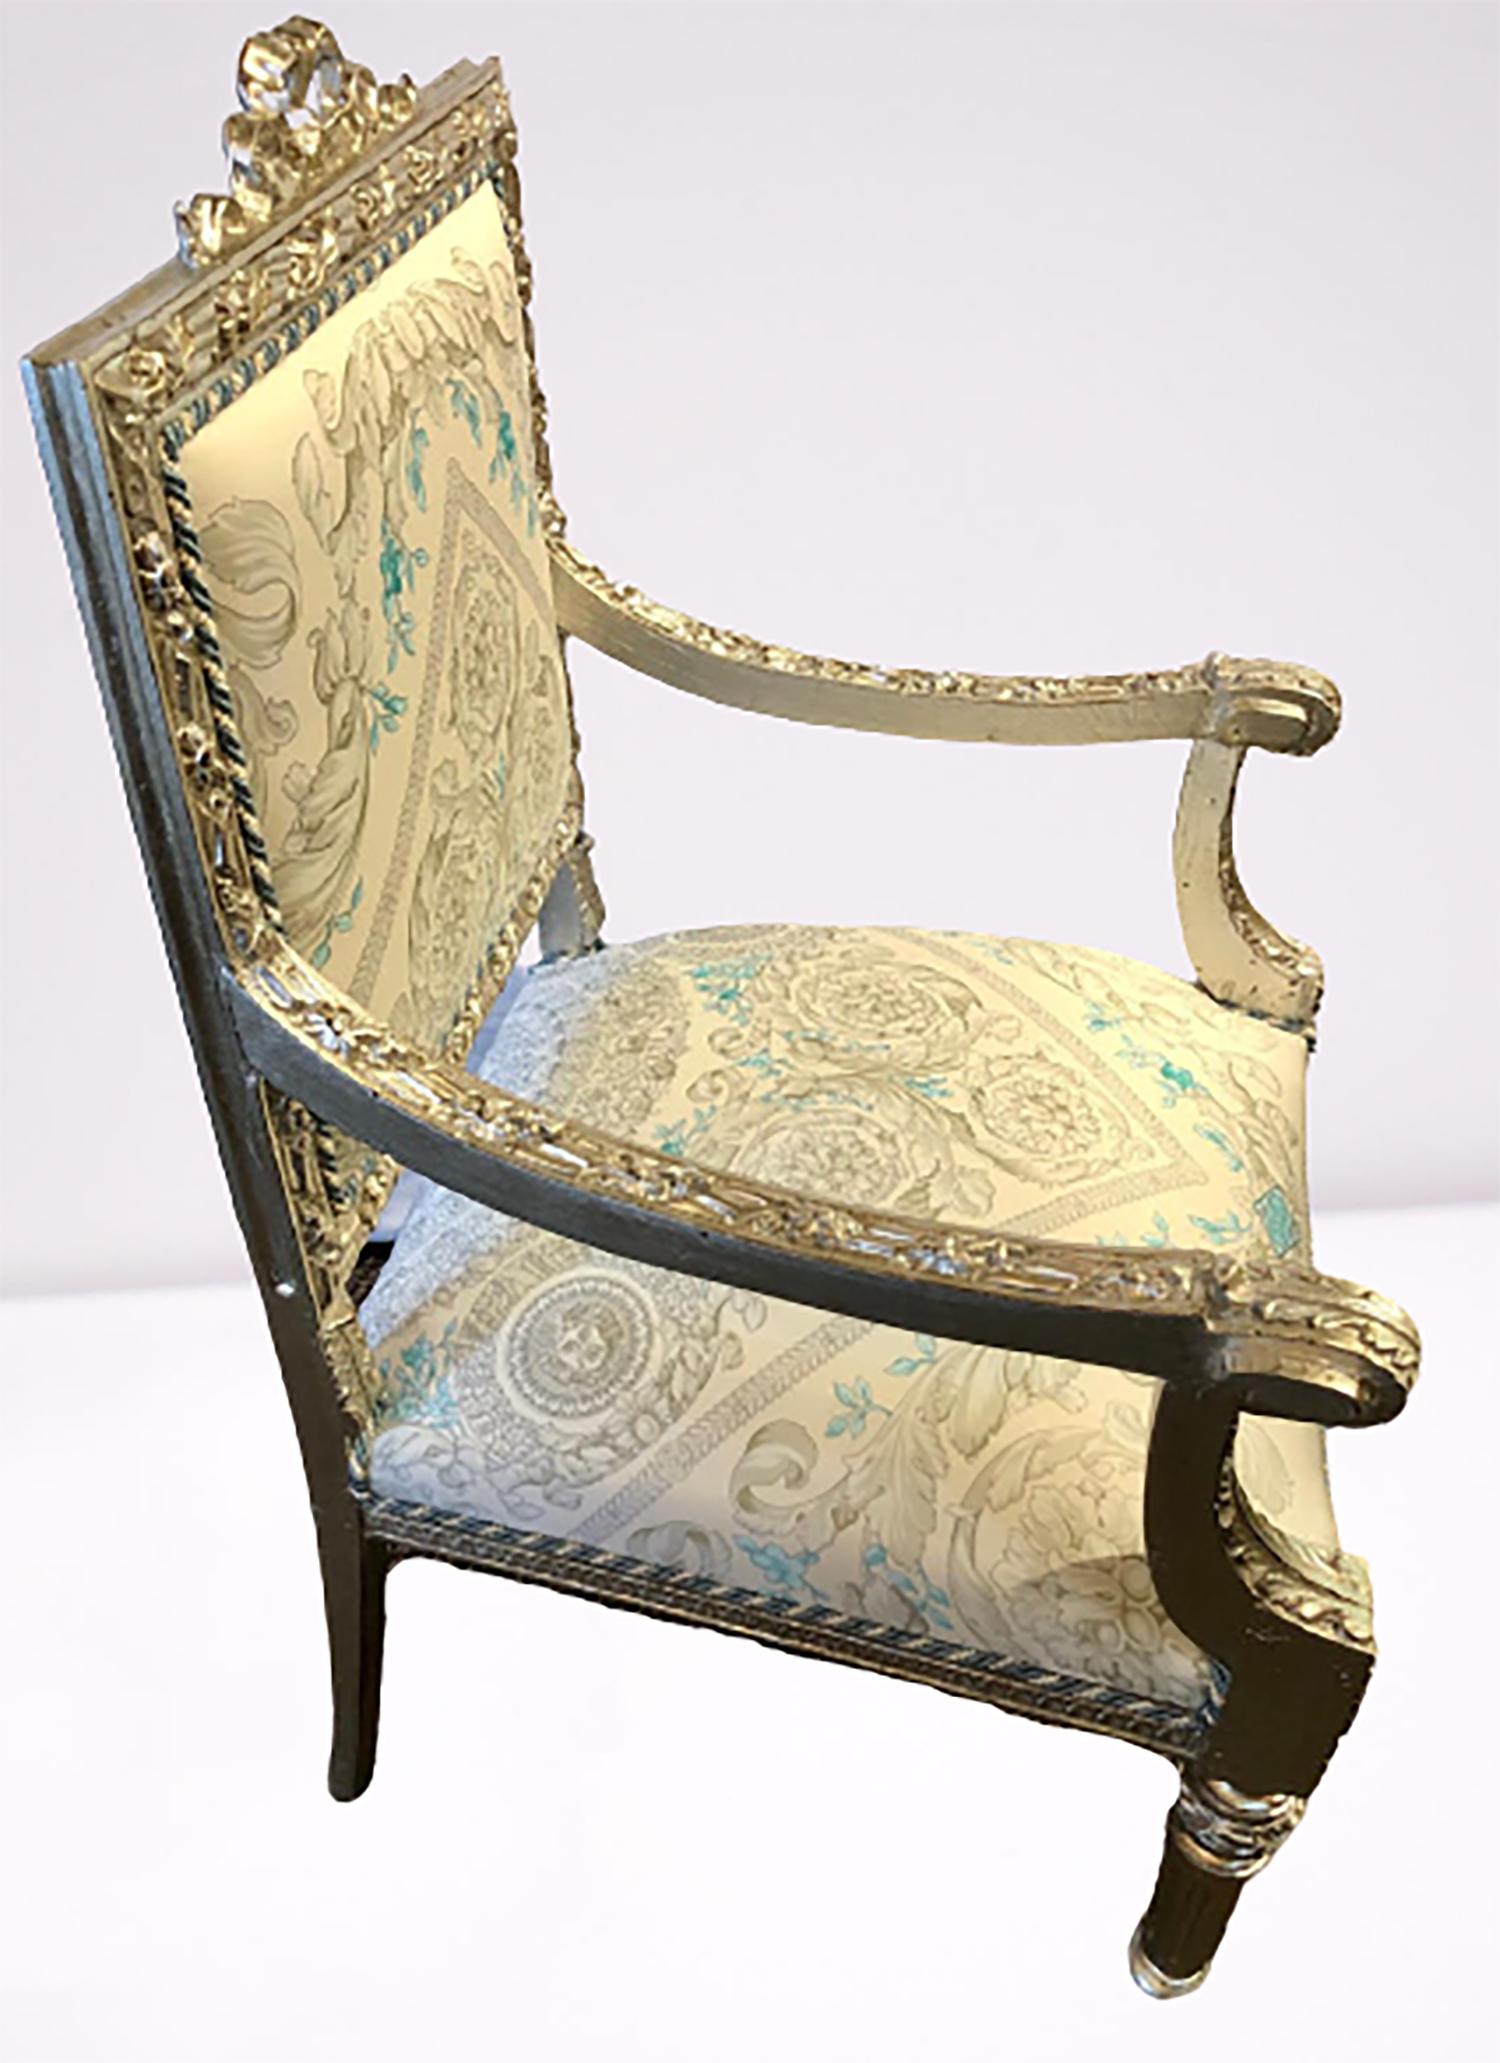 Stunning Pair of French silver gilt 19th century / 1920s Louis XVI style armchairs upholstered in Versace fabric. These incredible late 19th or early 20th century frames are simply carved terminating in bow and ribbon crests. The whole on Louis XVI